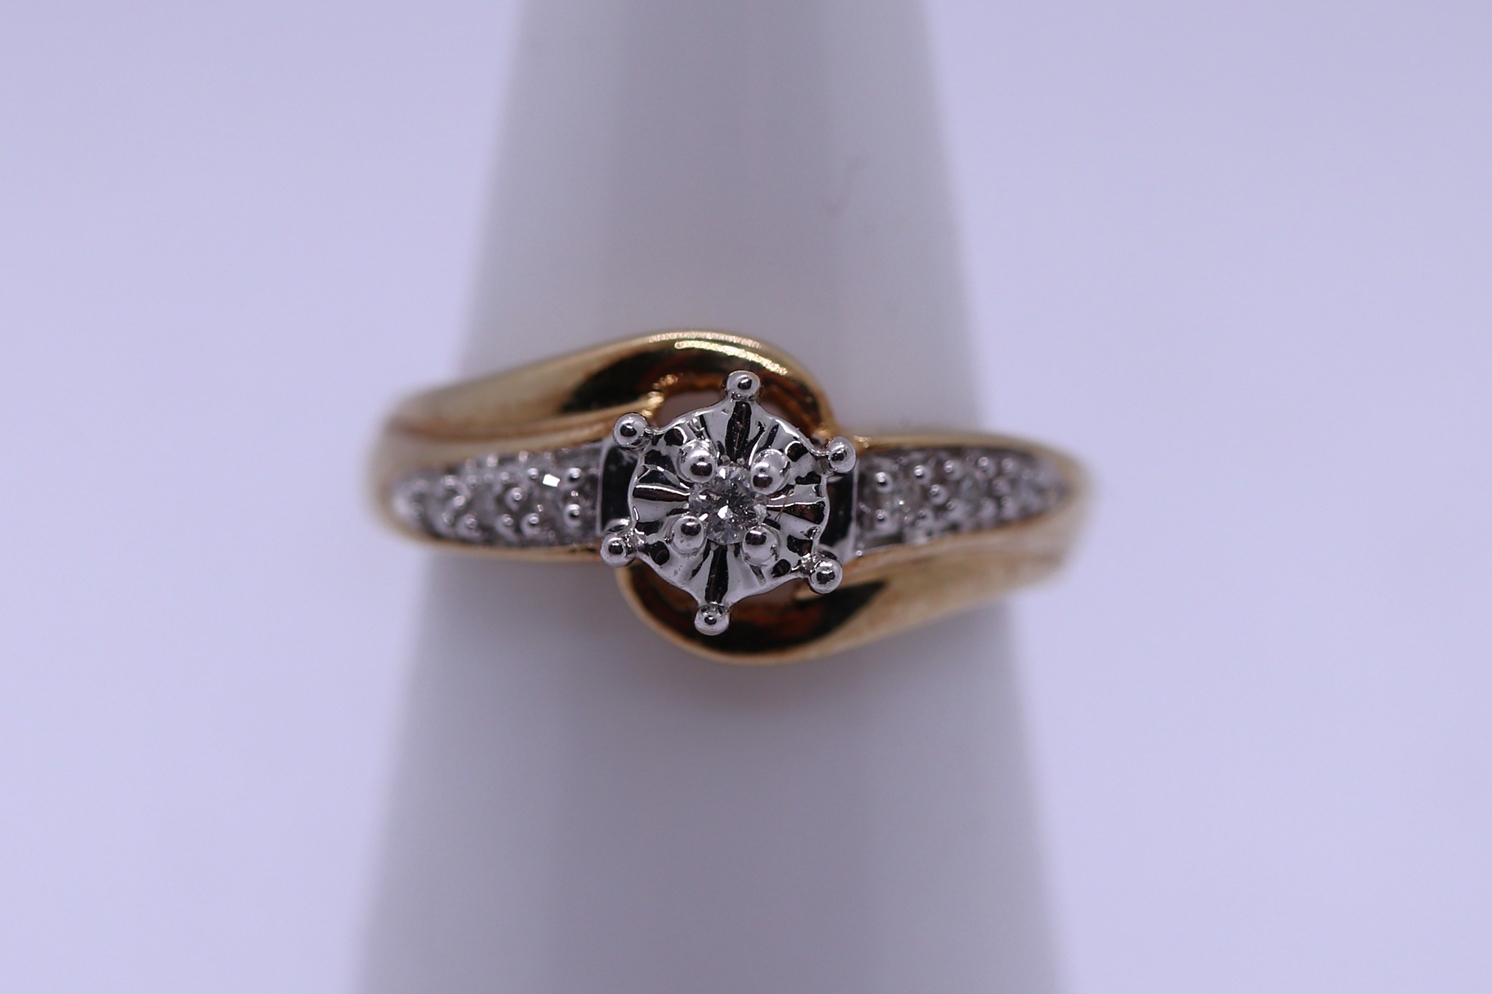 9ct gold diamond solitaire ring with diamond encrusted shoulders - Size I - Image 3 of 3